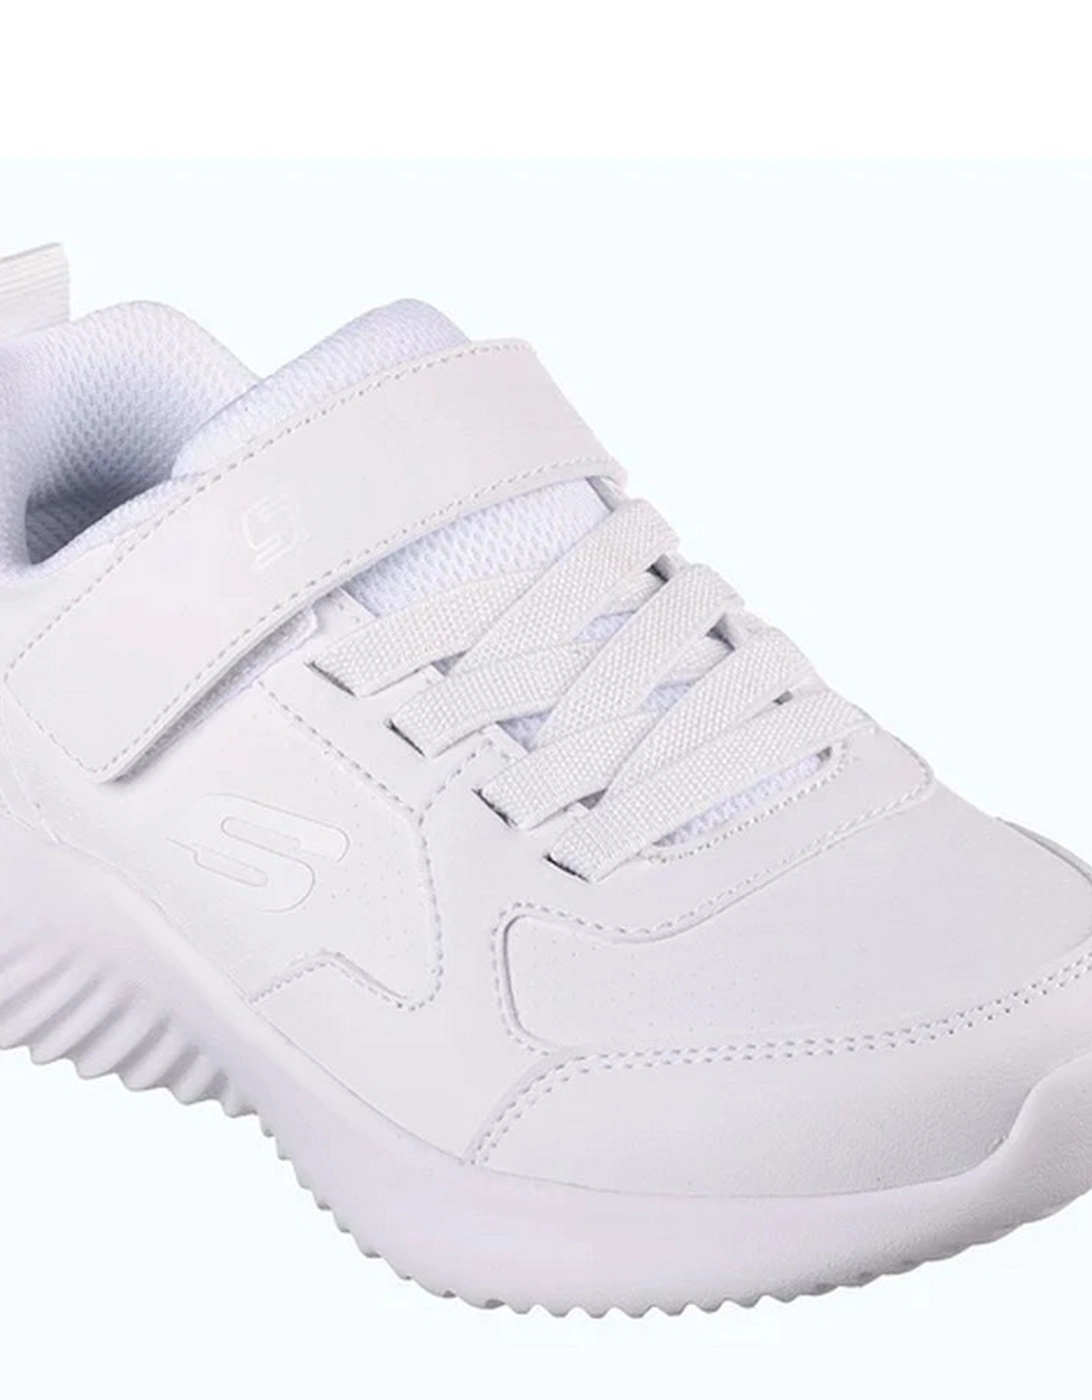 Boys Bounder - Power Study School Shoes, 6 of 5